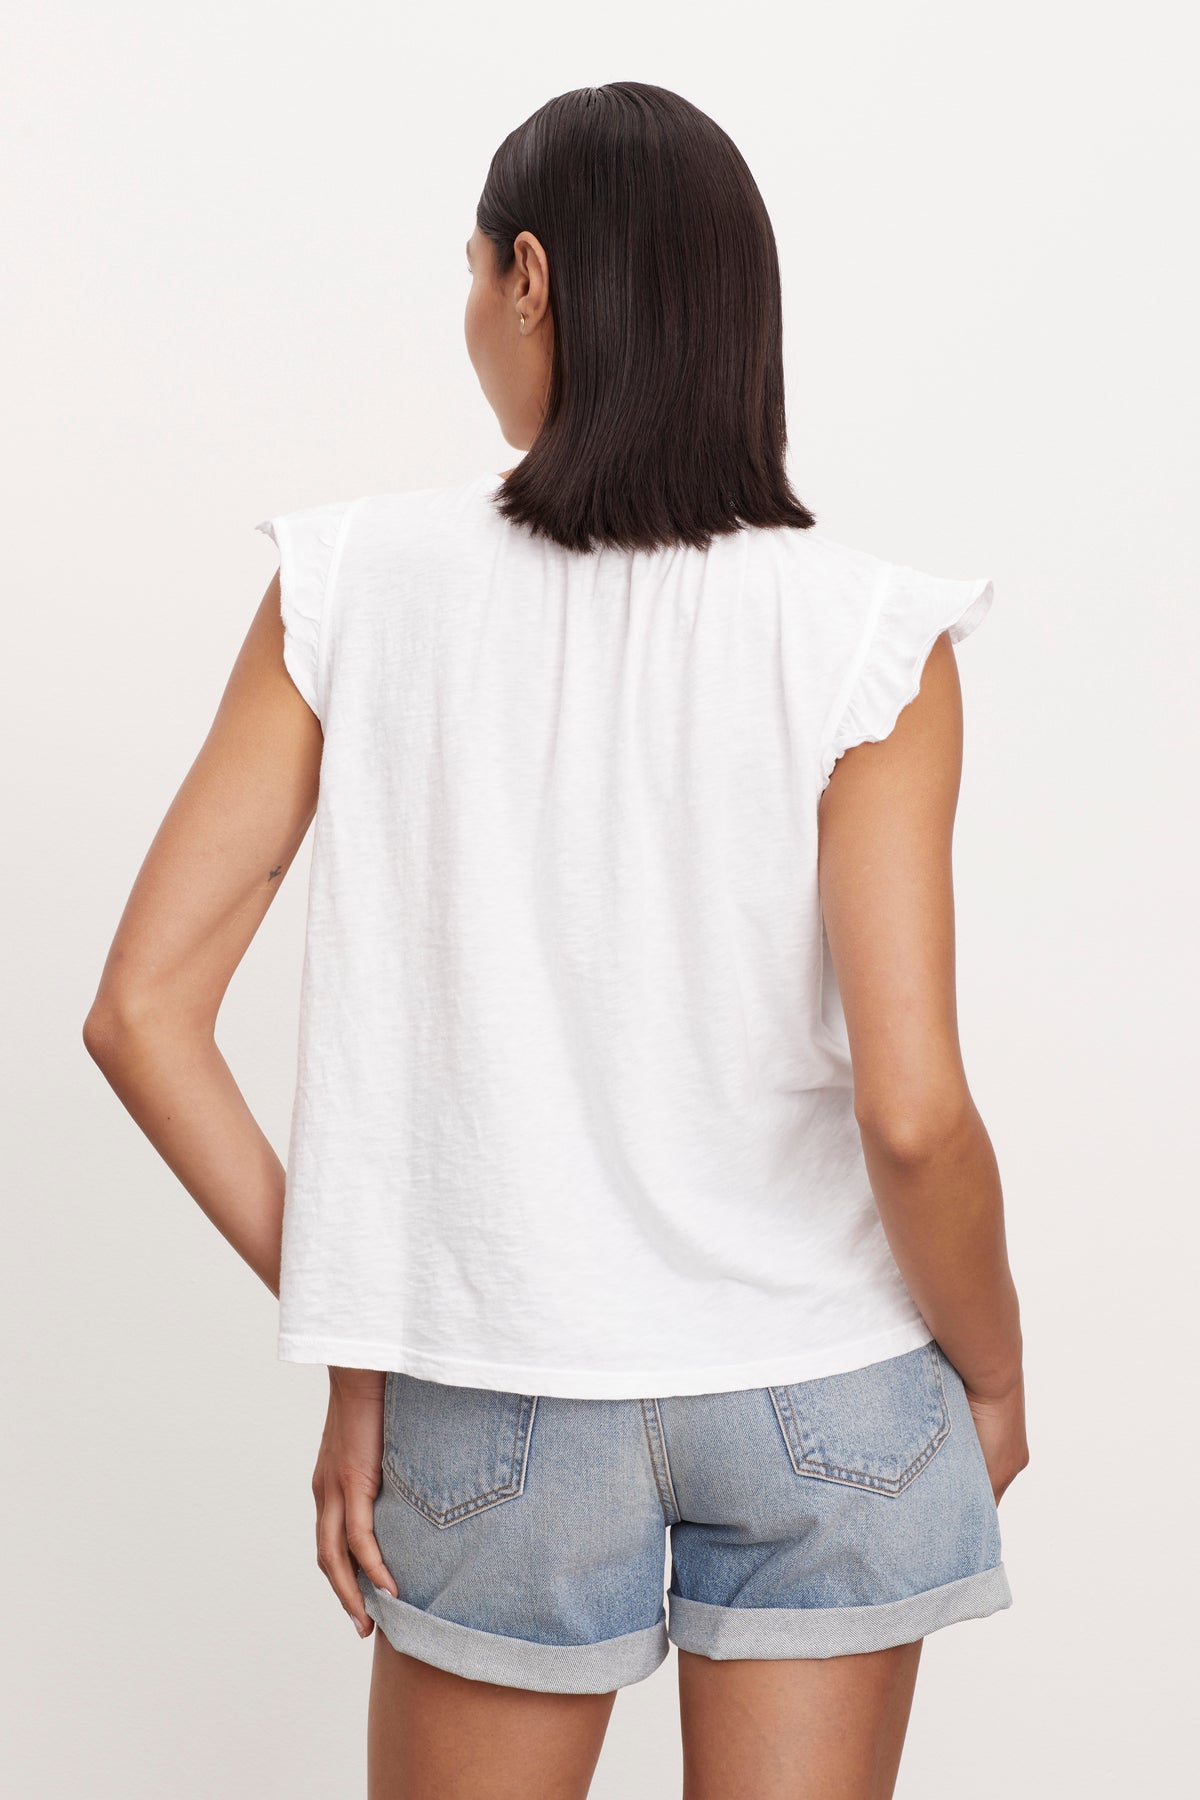 the back view of a woman wearing denim shorts and a Velvet by Graham & Spencer STACY RUFFLE SLEEVE TANK.-26484793737409